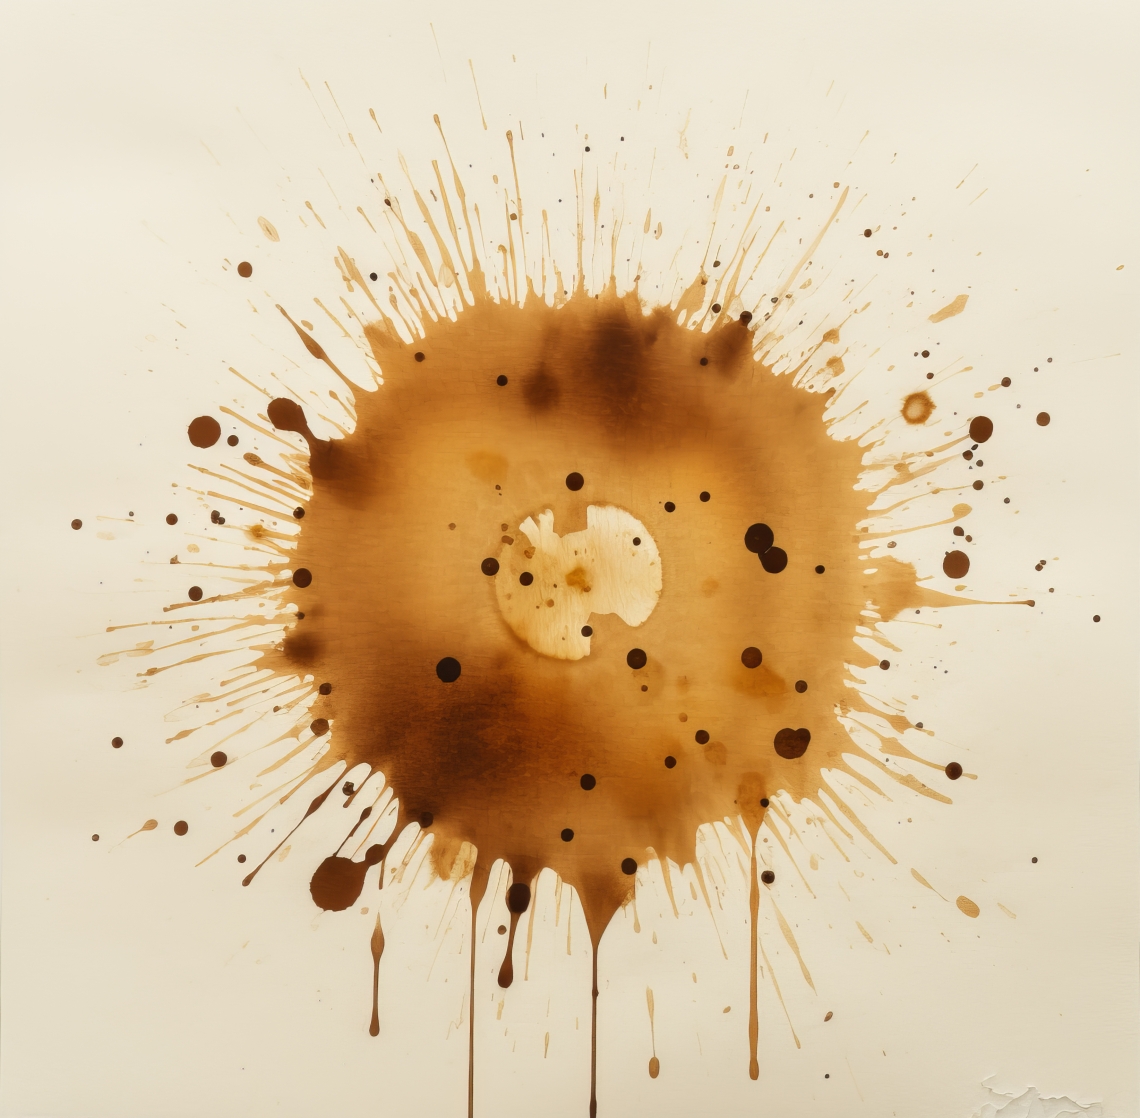 Stains_Splatters_027